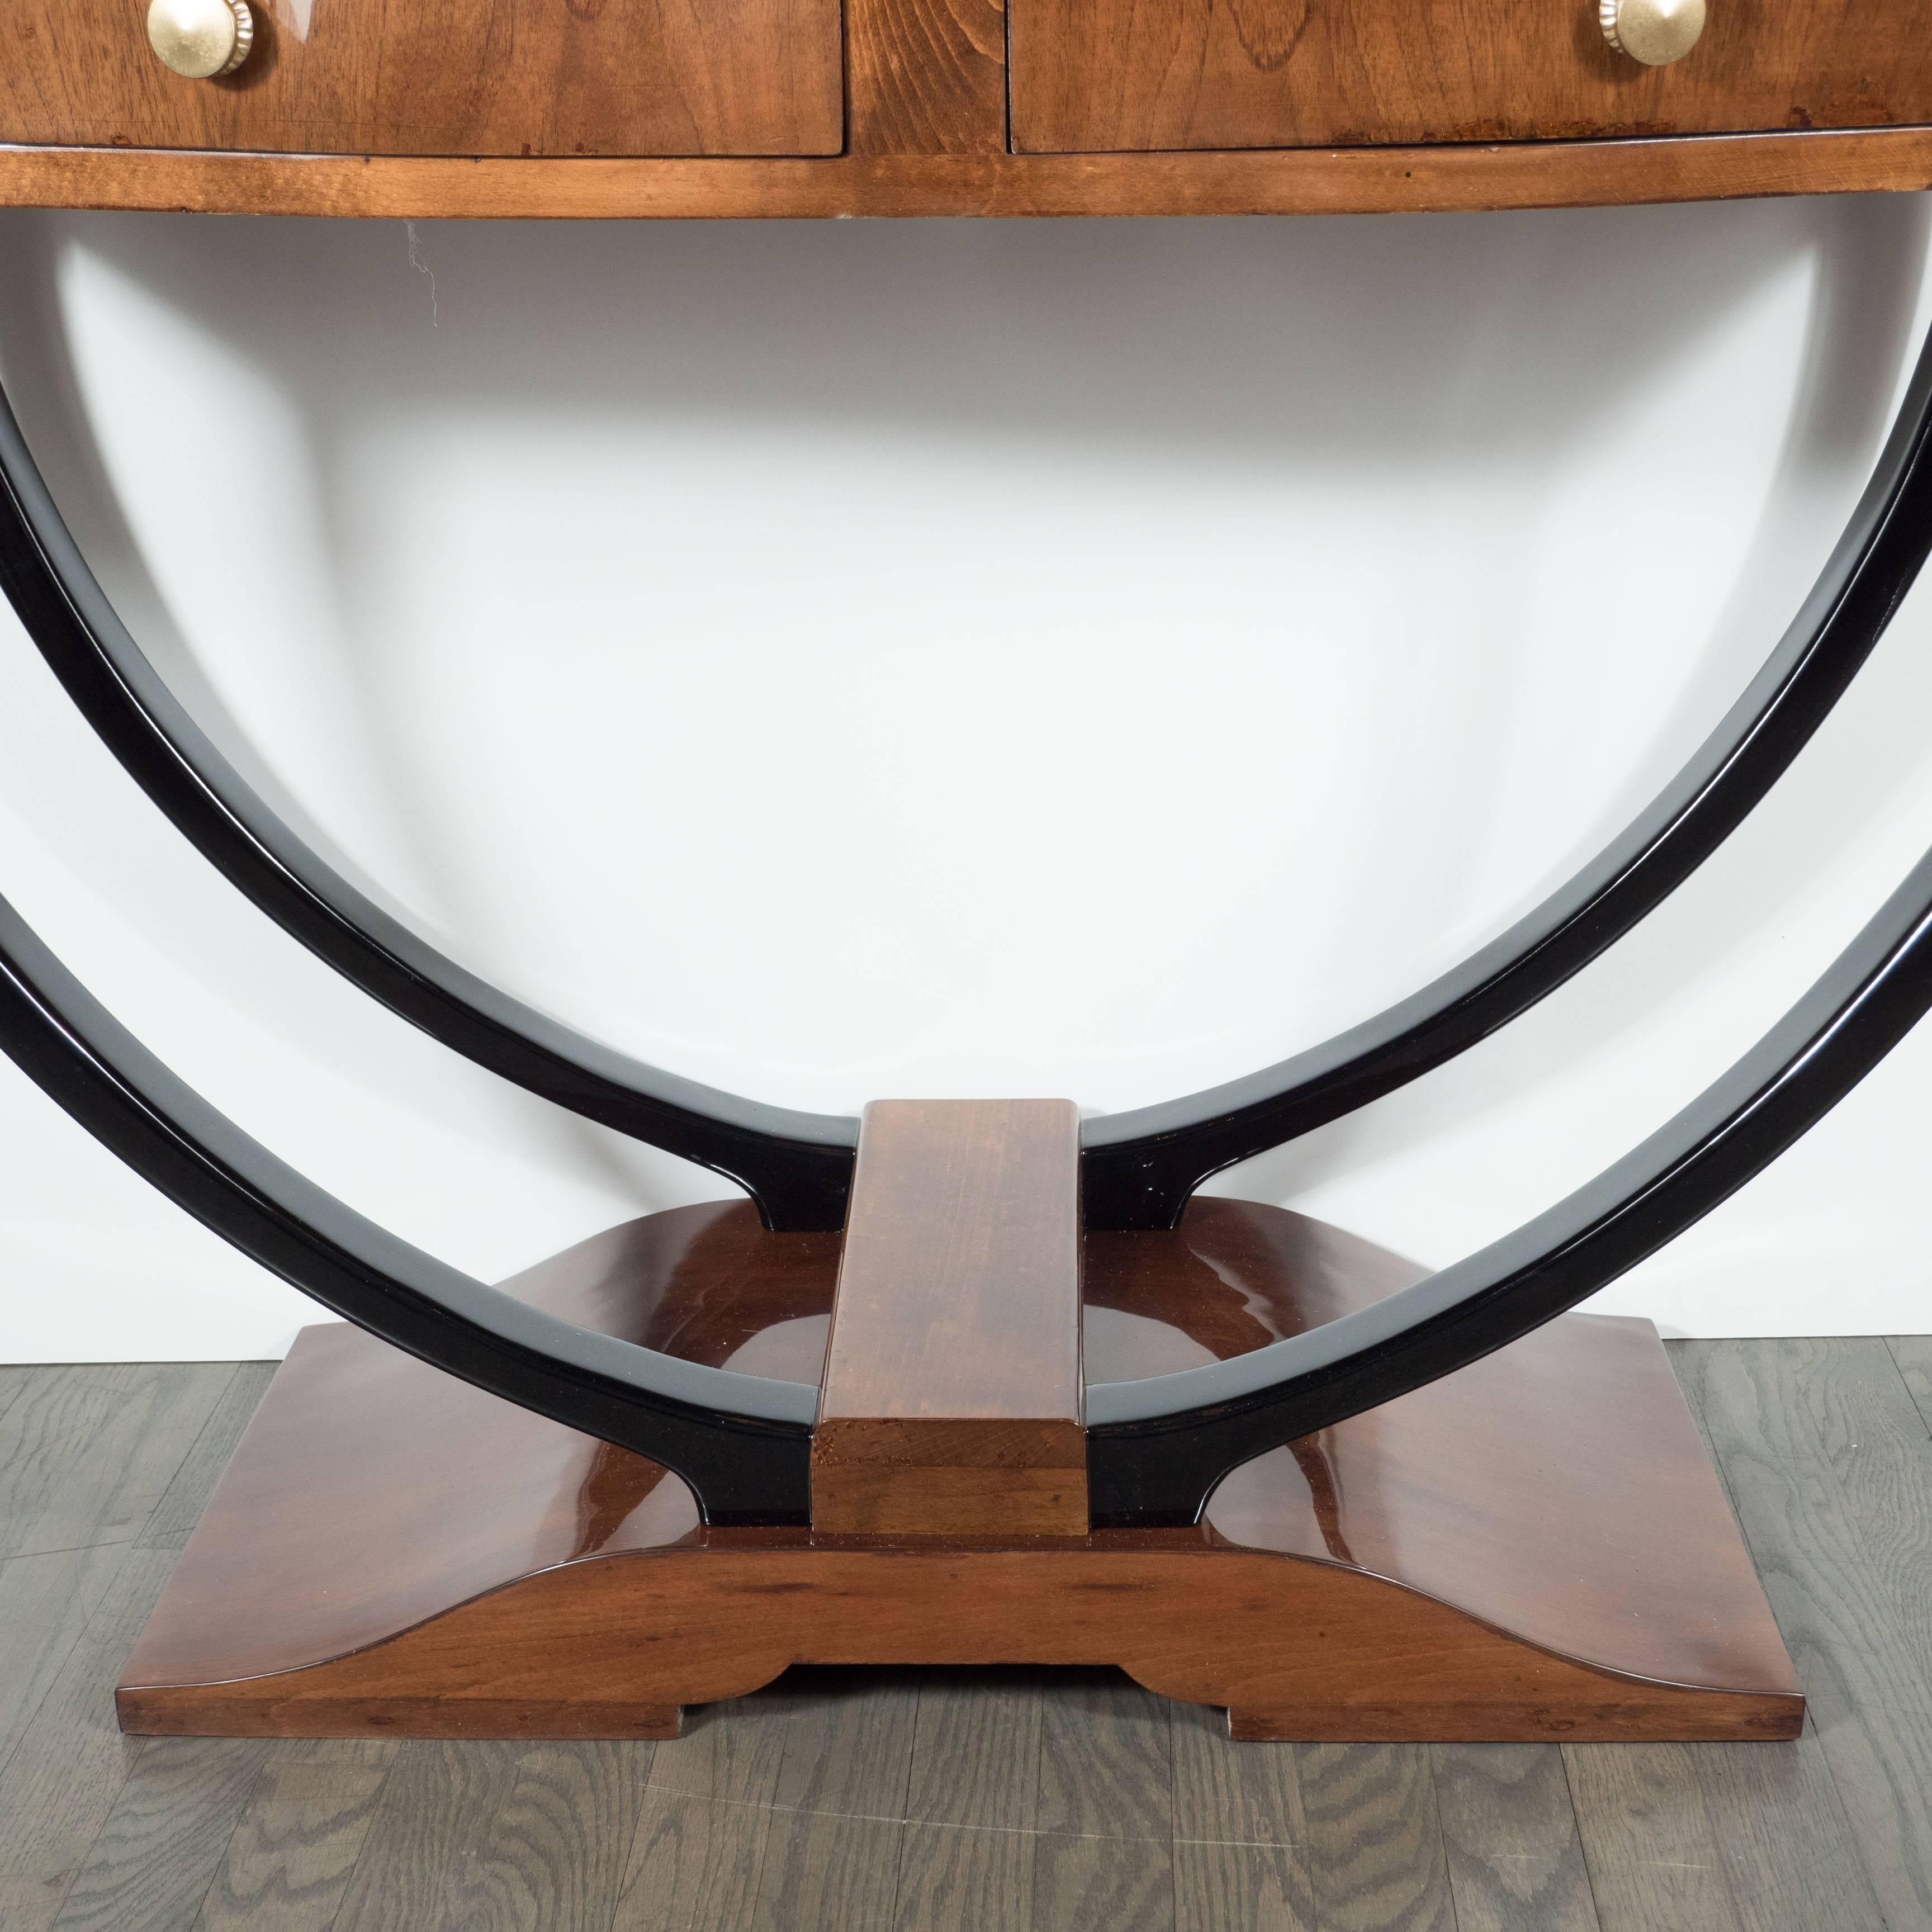 Mid-20th Century French Art Deco Console in Bookmatched Walnut and Black Lacquer Accents